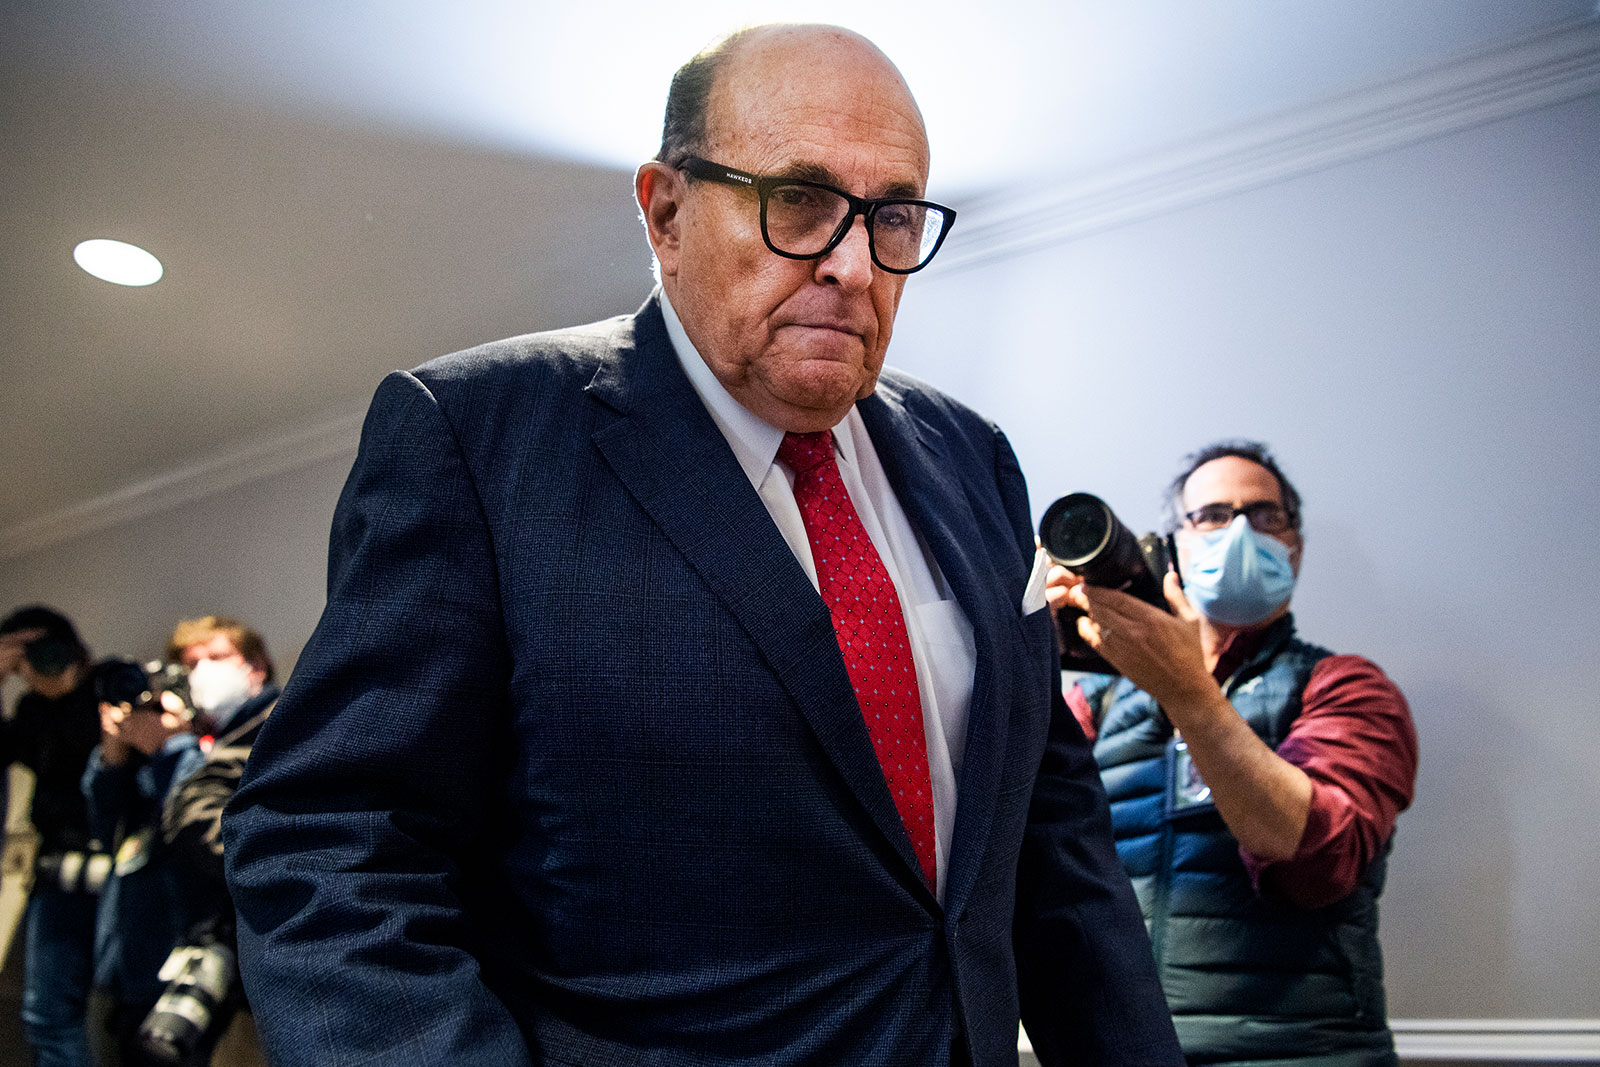 Rudy Giuliani arrives for a news conference at Republican National Committee headquarters on Nov. 19.